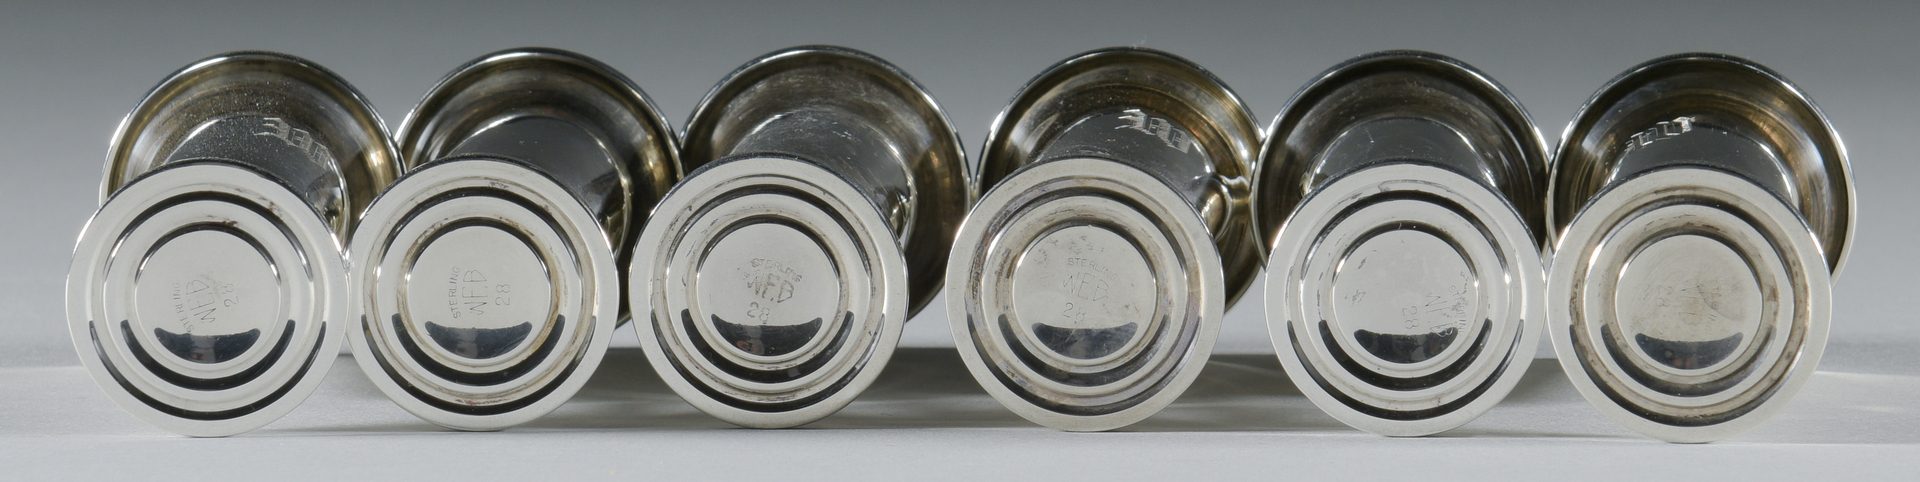 Lot 918: 8 Sterling Cordials & 2 Sterling Tumblers